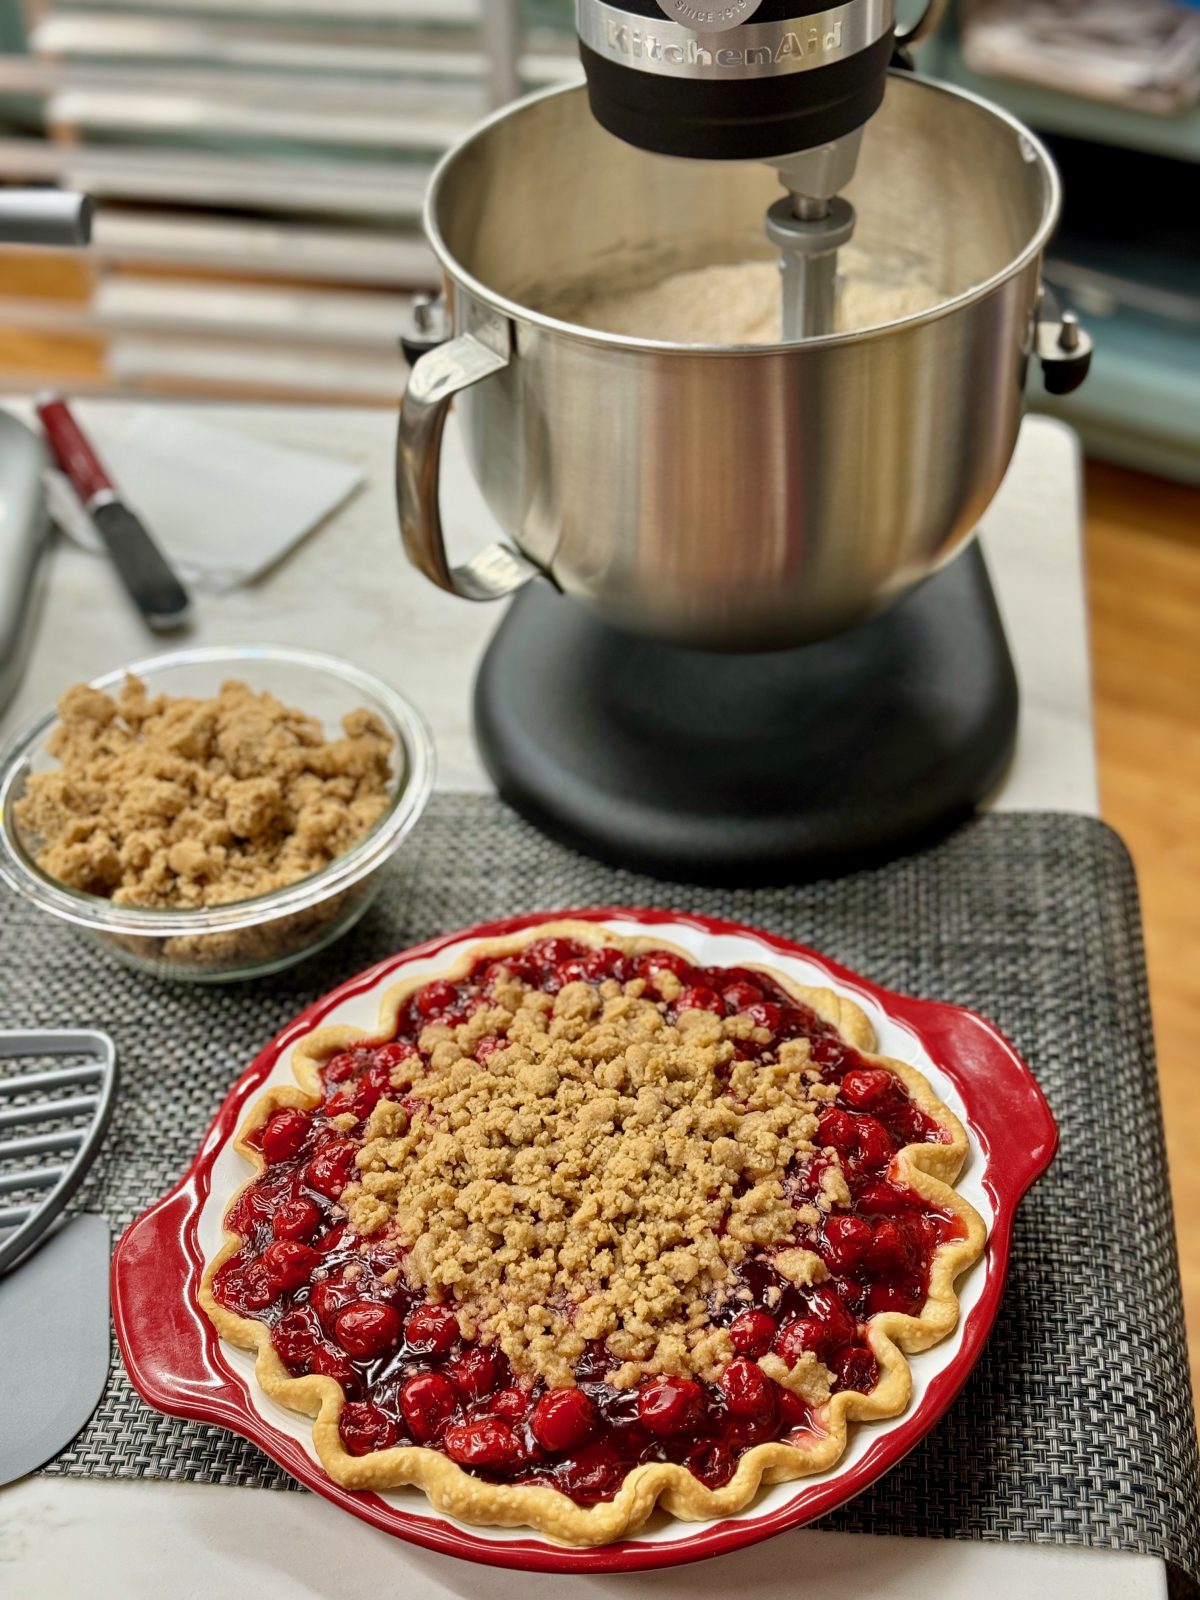 Vertical photo with a cherry pie with brown sugar crumble topping in the foreground. A bowl of brown sugar crumble topping in the middle of the photo and a KitchenAid stand mixer in the background.
